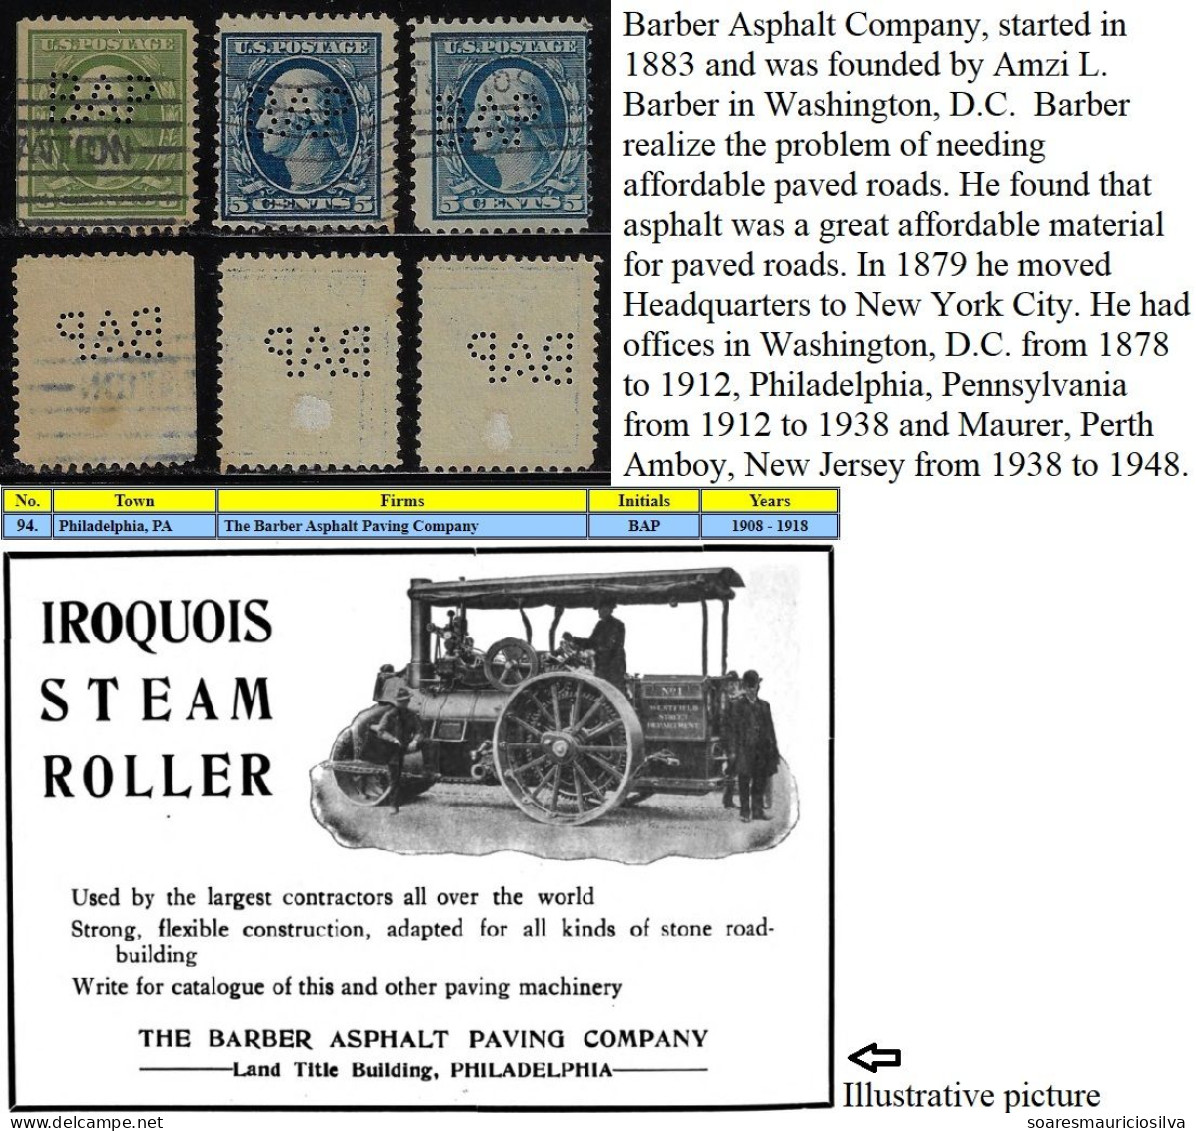 USA United States 1908/1918 3 Stamp Perfin BAP By The Barber Asphalt Paving Company From Philadelphia Lochung Perfore - Perfin